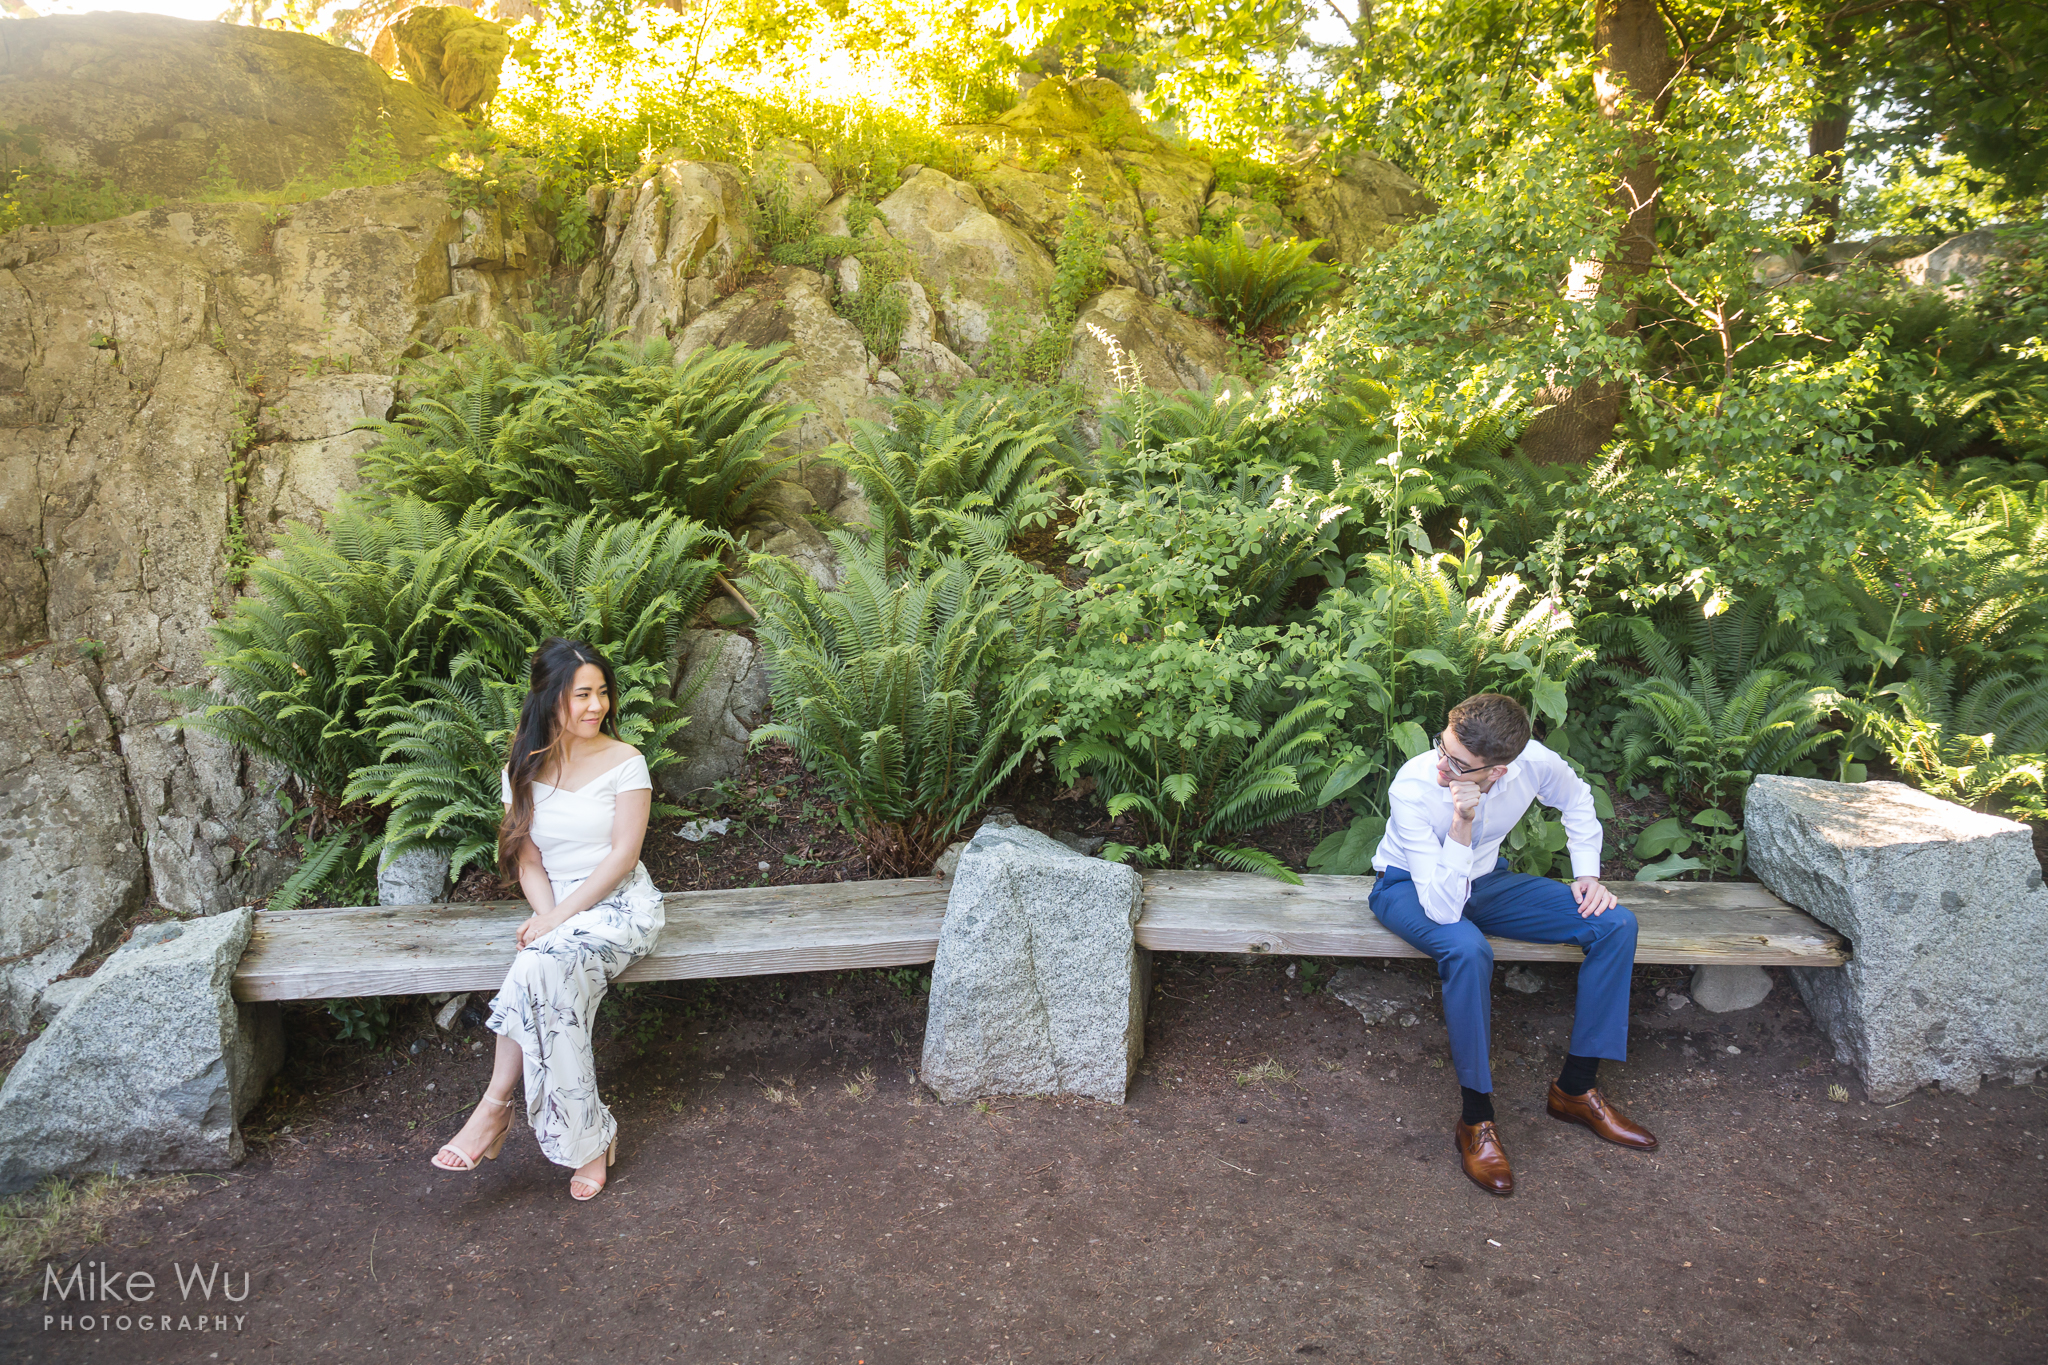 Vancouver, love, engagement, shoot, photography, North Vancouver, whytecliff partk, couple, lovely, benches, bushes, rainforest, rocks, sunset, glow, environment, beautiful, photography, shoot, photoshoot, portraits, environment, matching, pair, destiny, park